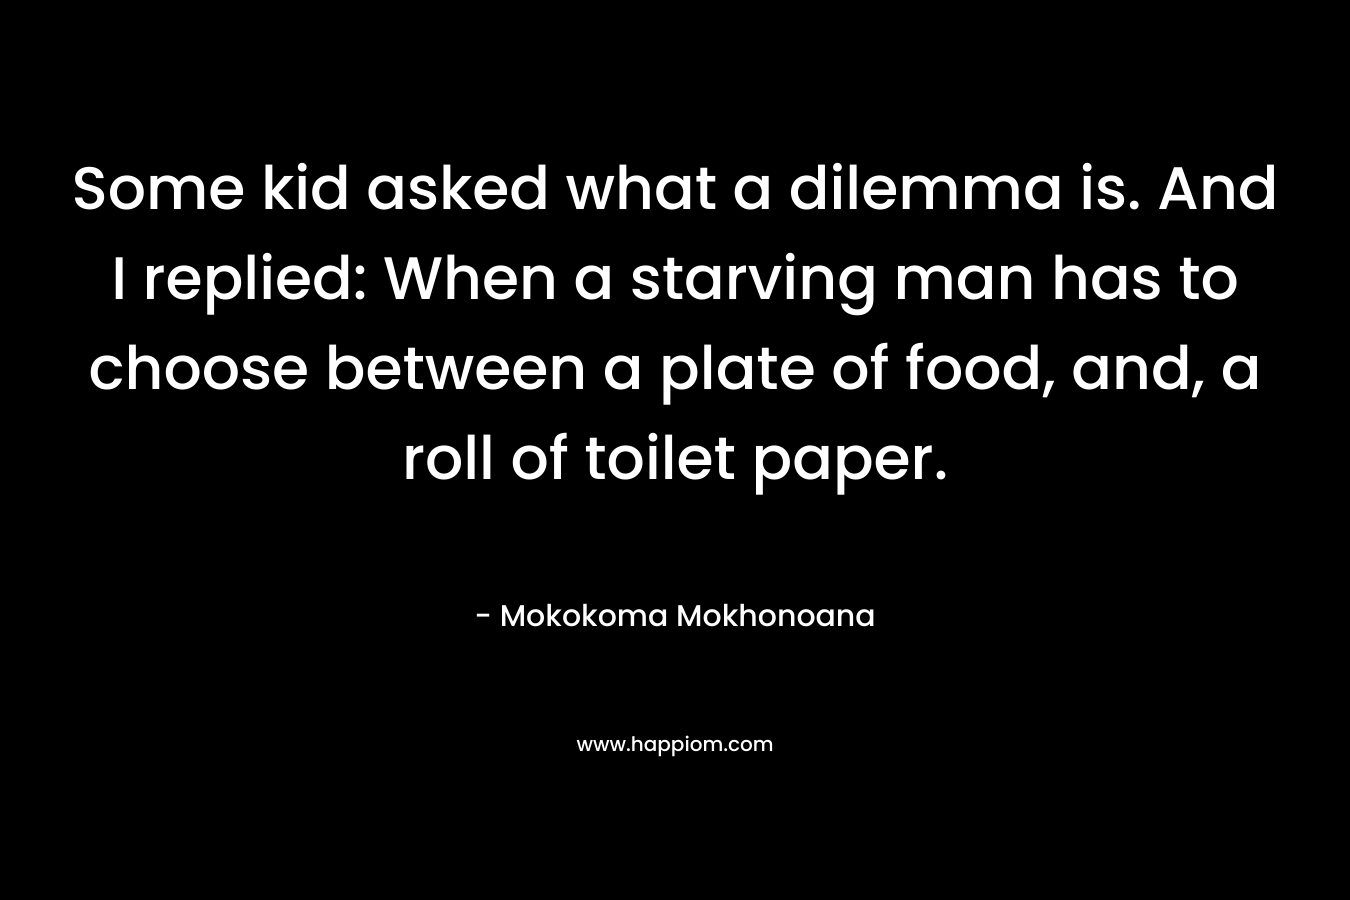 Some kid asked what a dilemma is. And I replied: When a starving man has to choose between a plate of food, and, a roll of toilet paper. – Mokokoma Mokhonoana